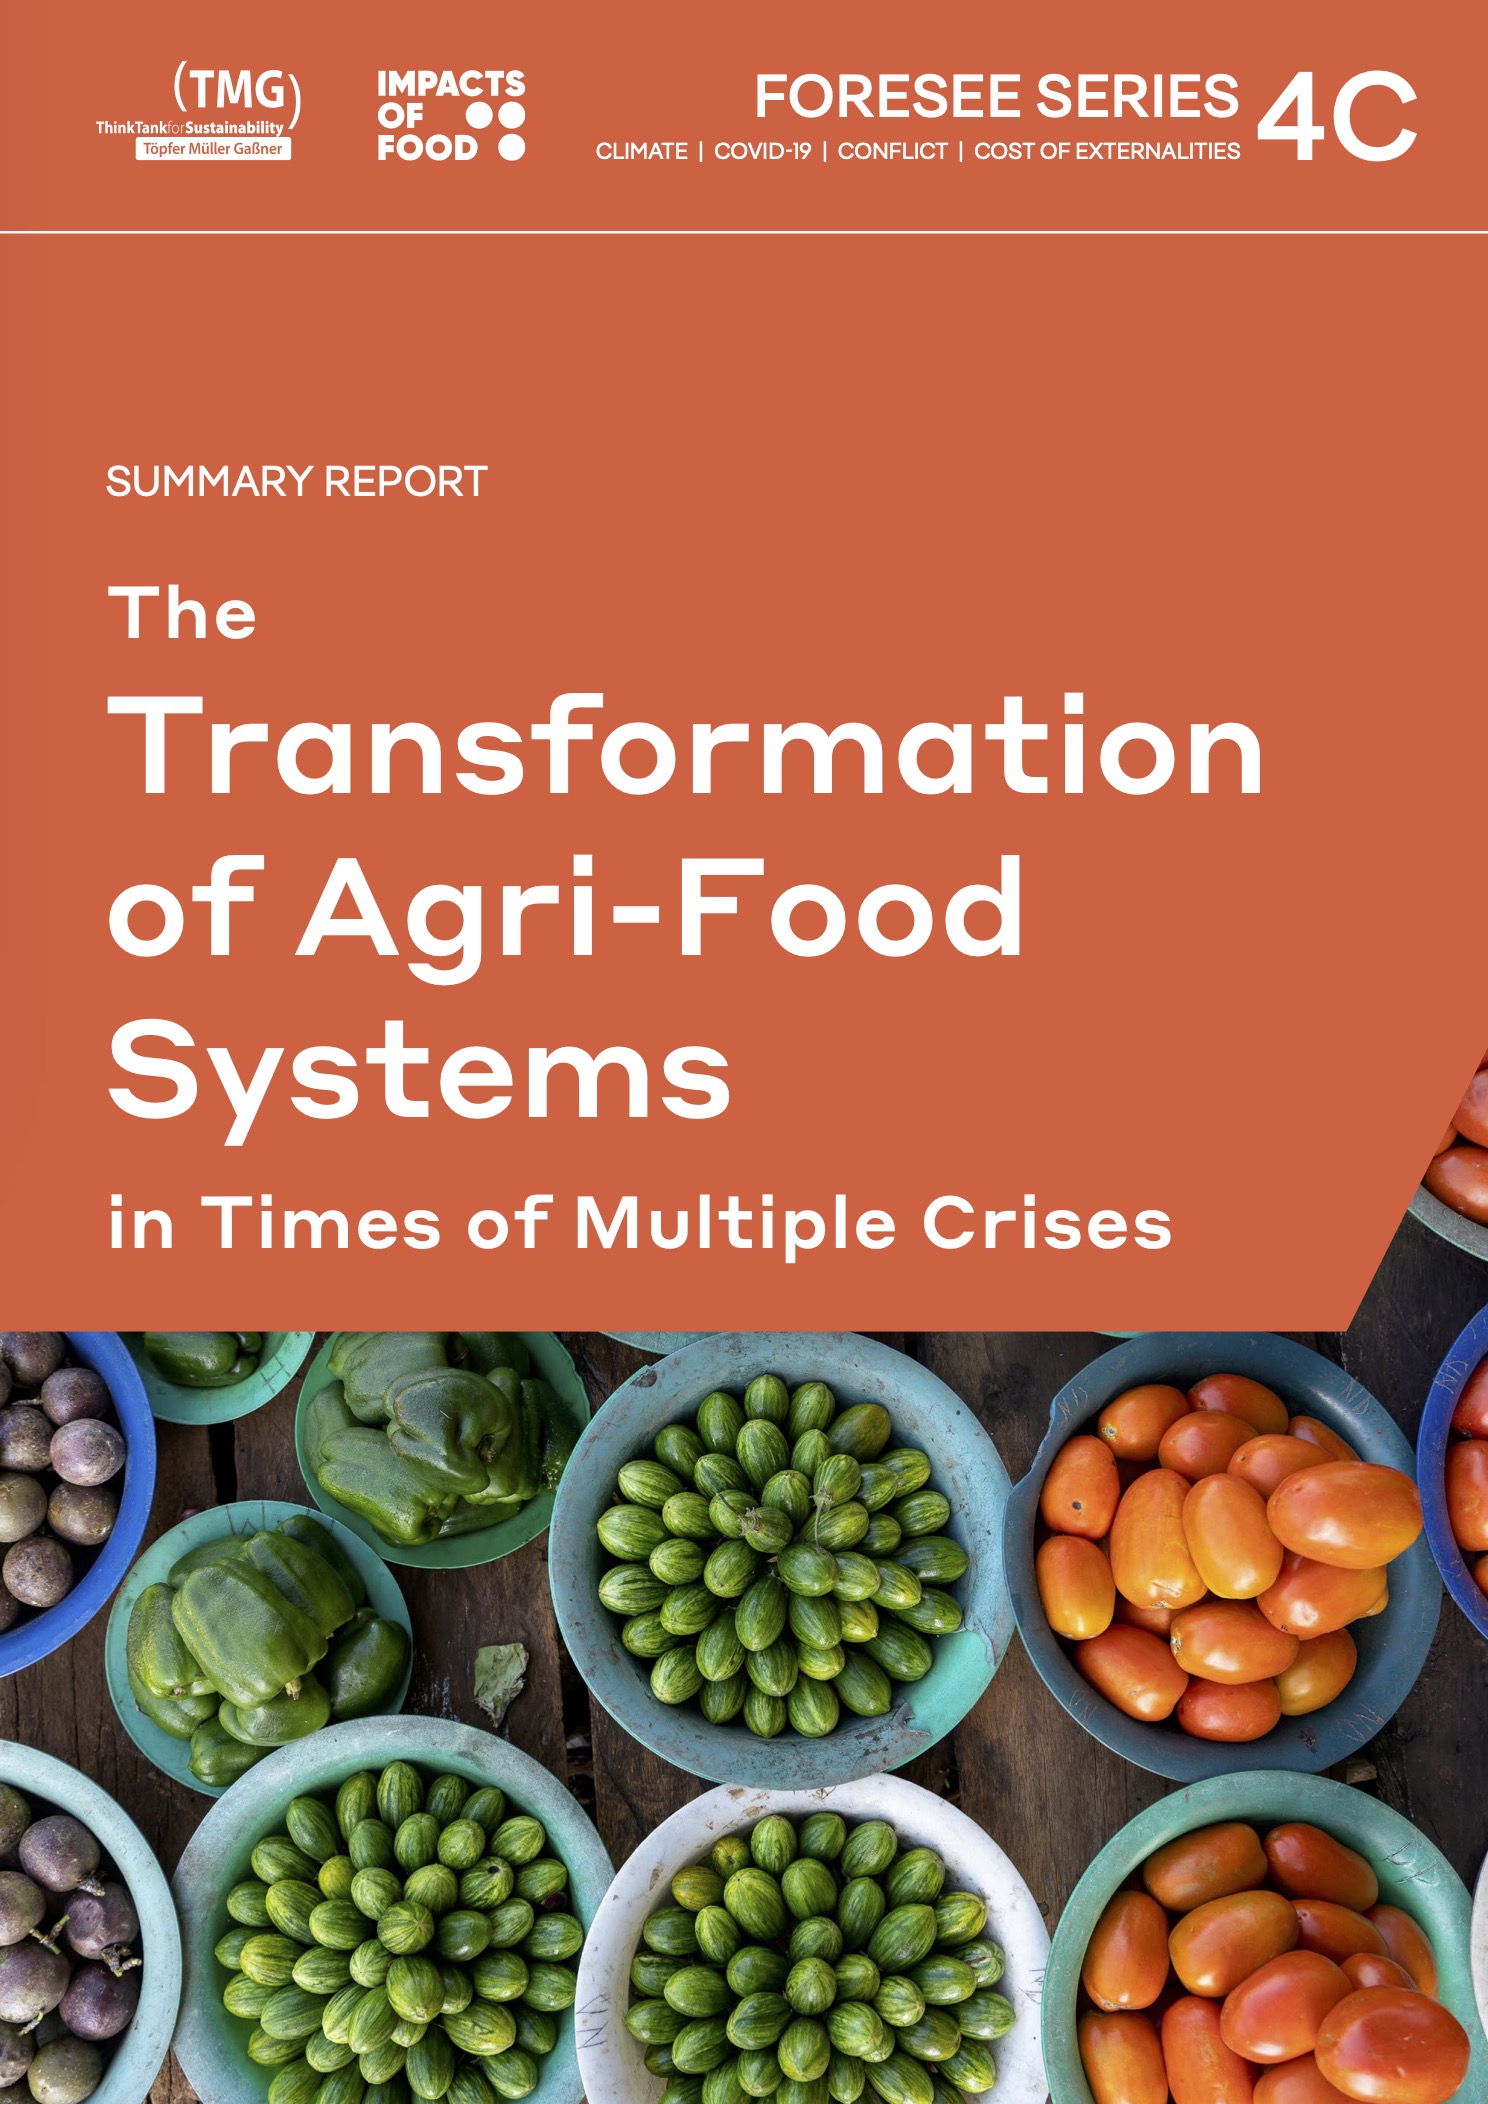 FORESEE (4C) Summary Report: The Transformation of Agri-Food Systems in Times of Multiple Crises